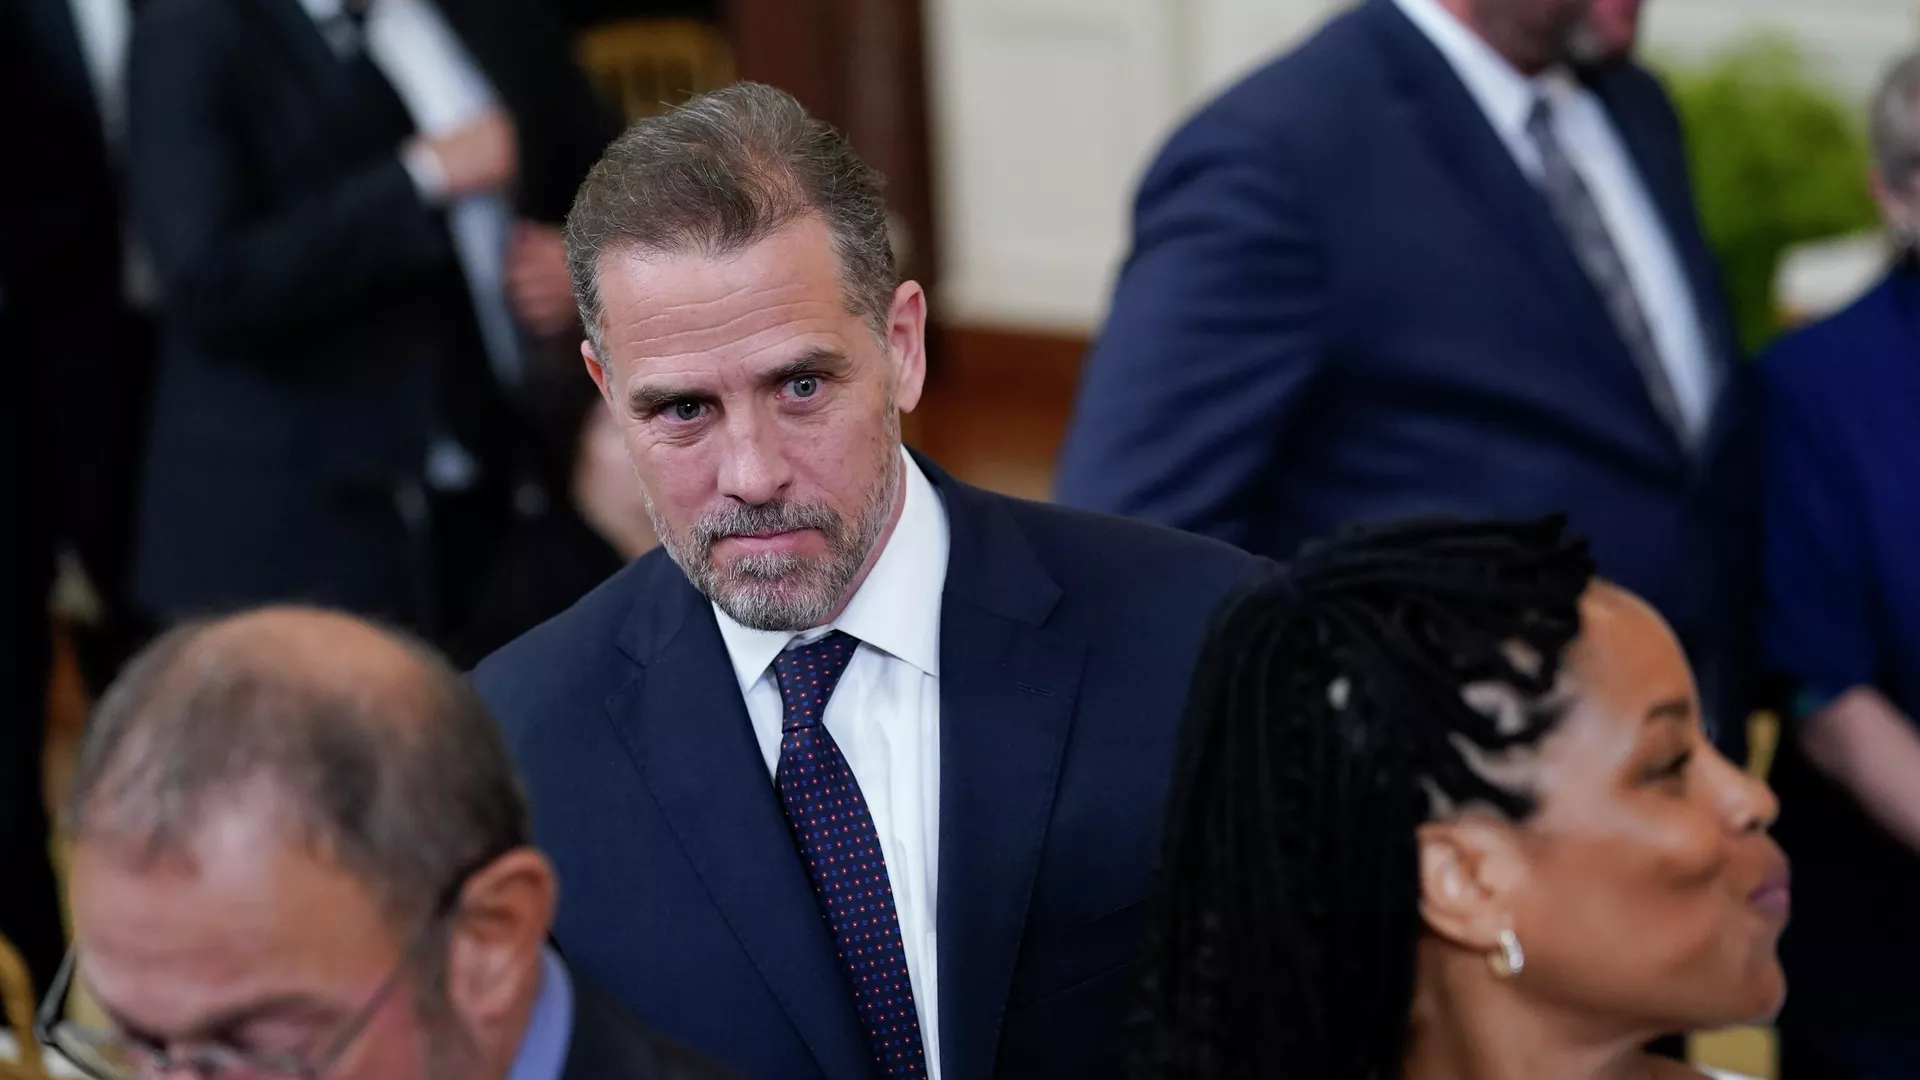 Thousands of Hunter Biden’s ‘Laptop From Hell’ Photos Laid Bare Online 1099496954_0:0:3073:1728_1920x0_80_0_0_33f5e636130dbbf692dfcb9eecccd908.jpg